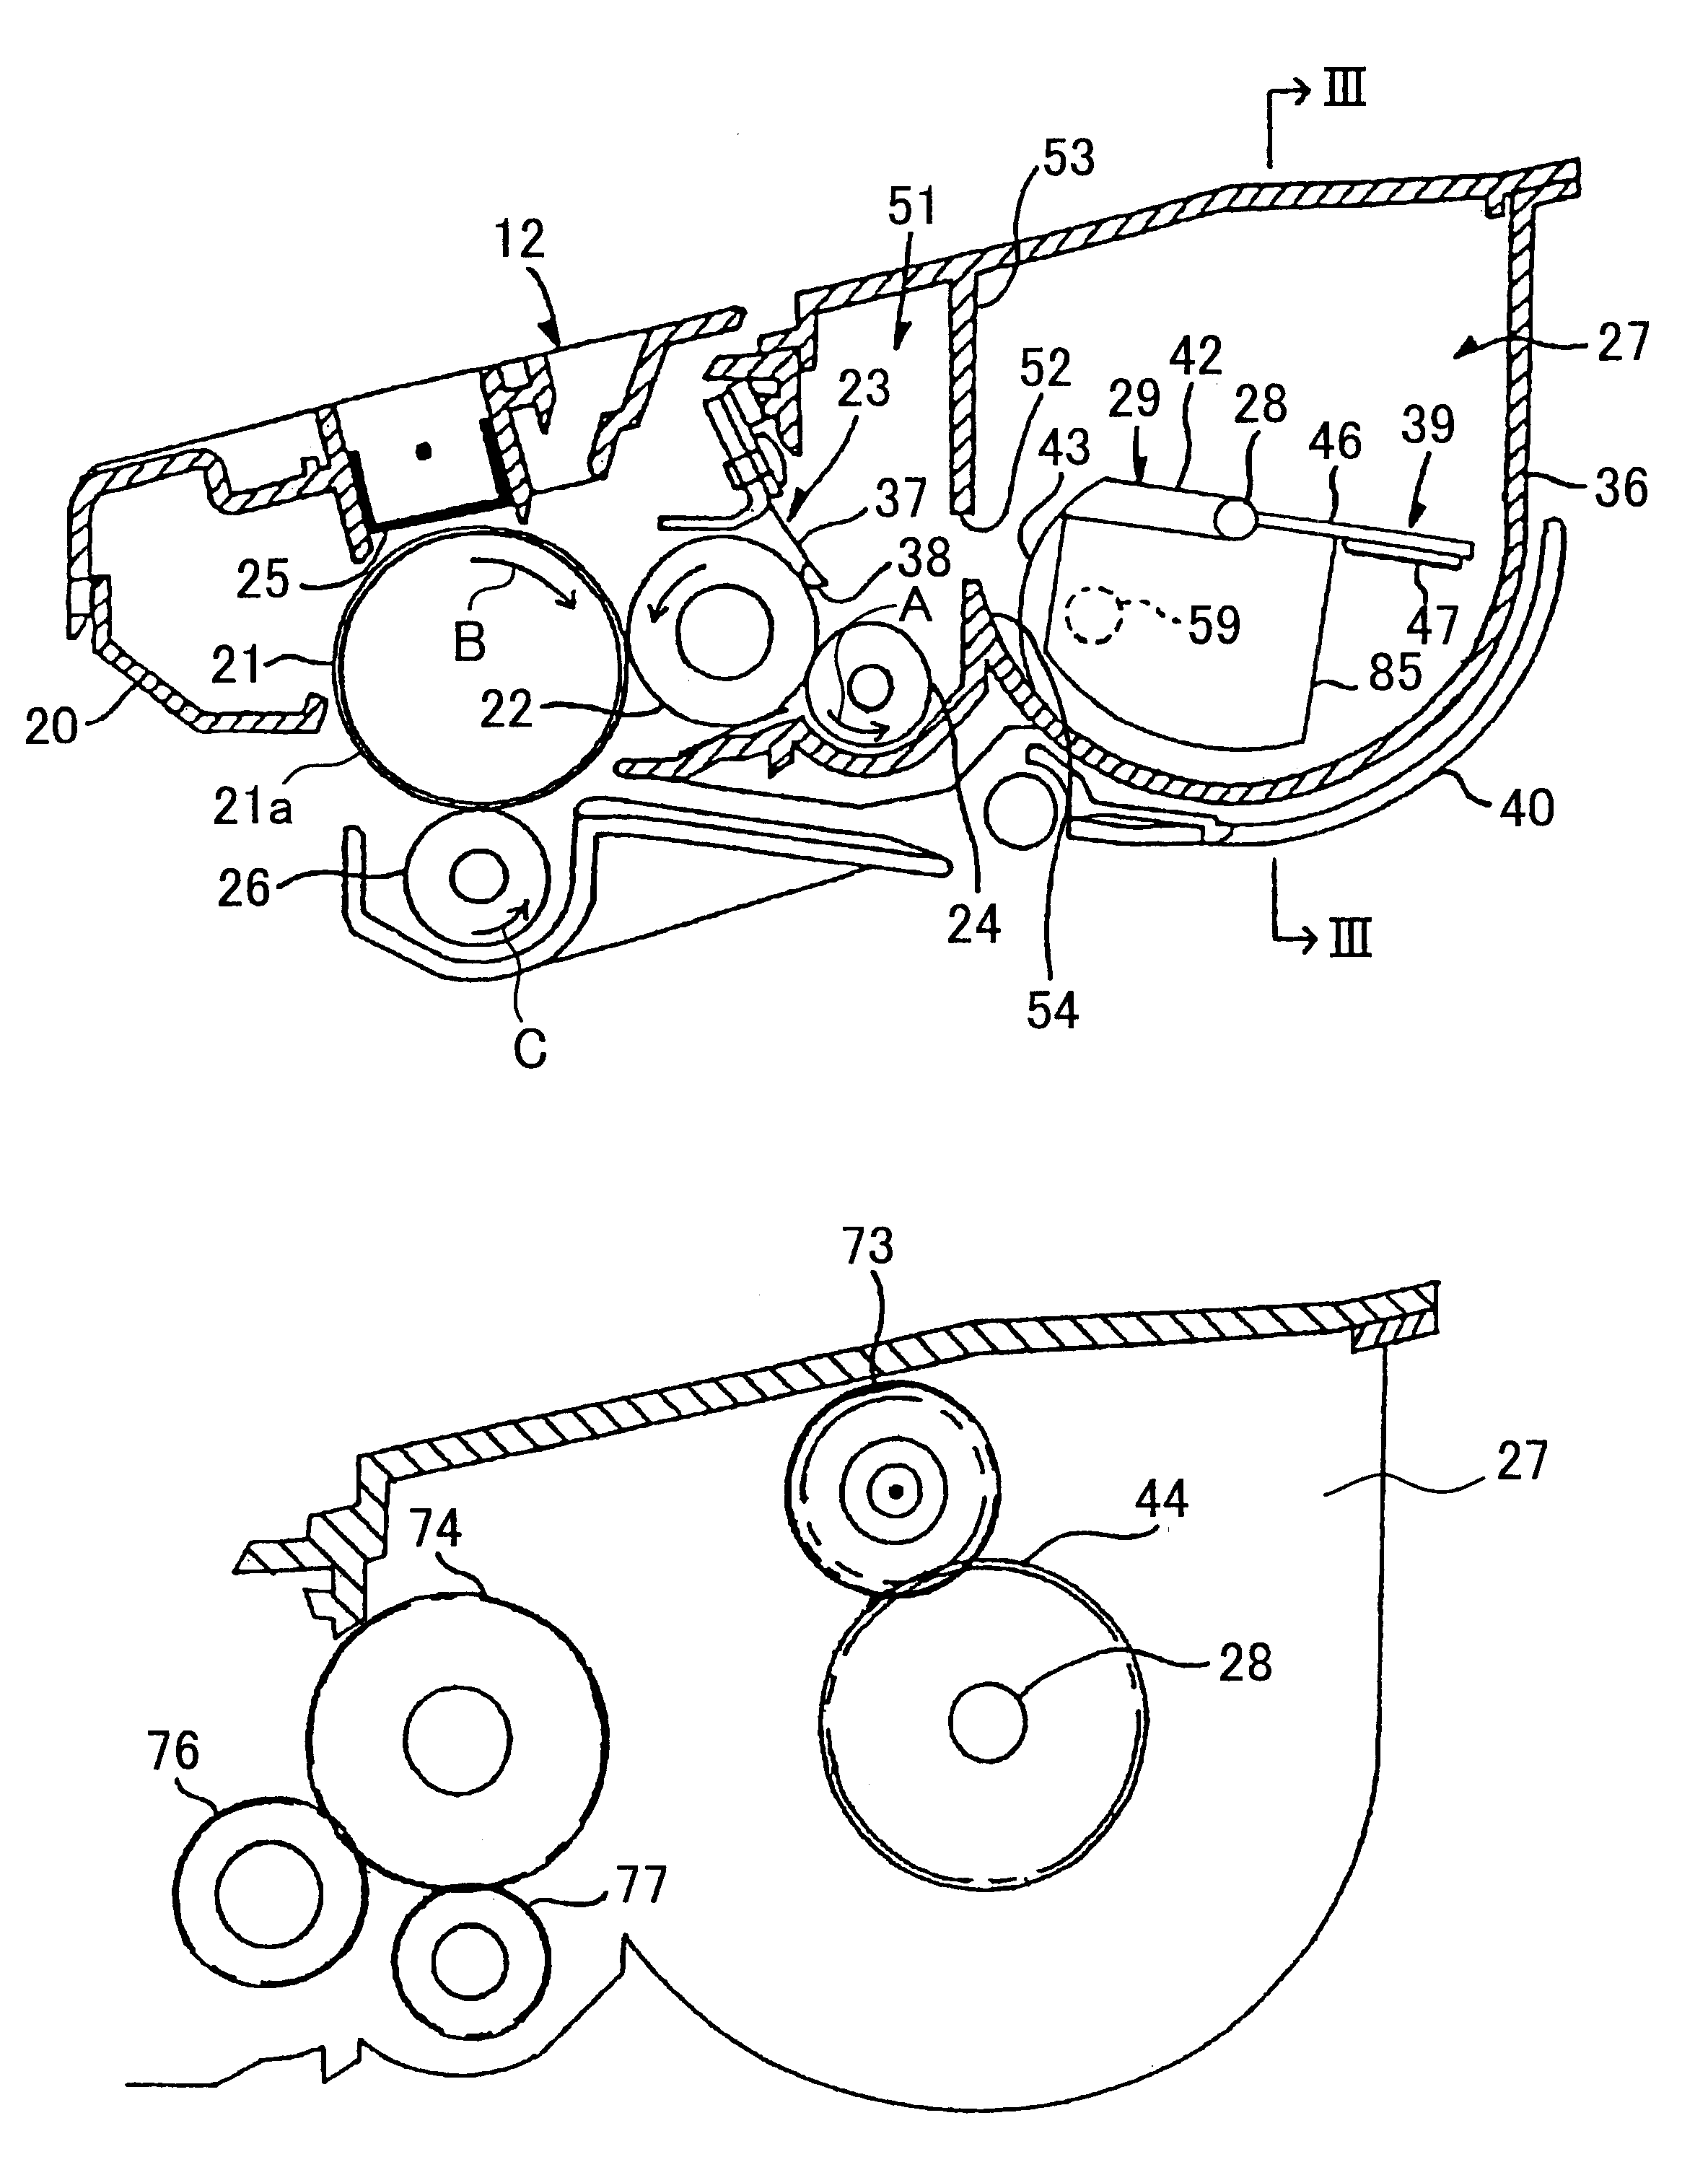 Developing cartridge with agitator driven to rotate independent from developing roller